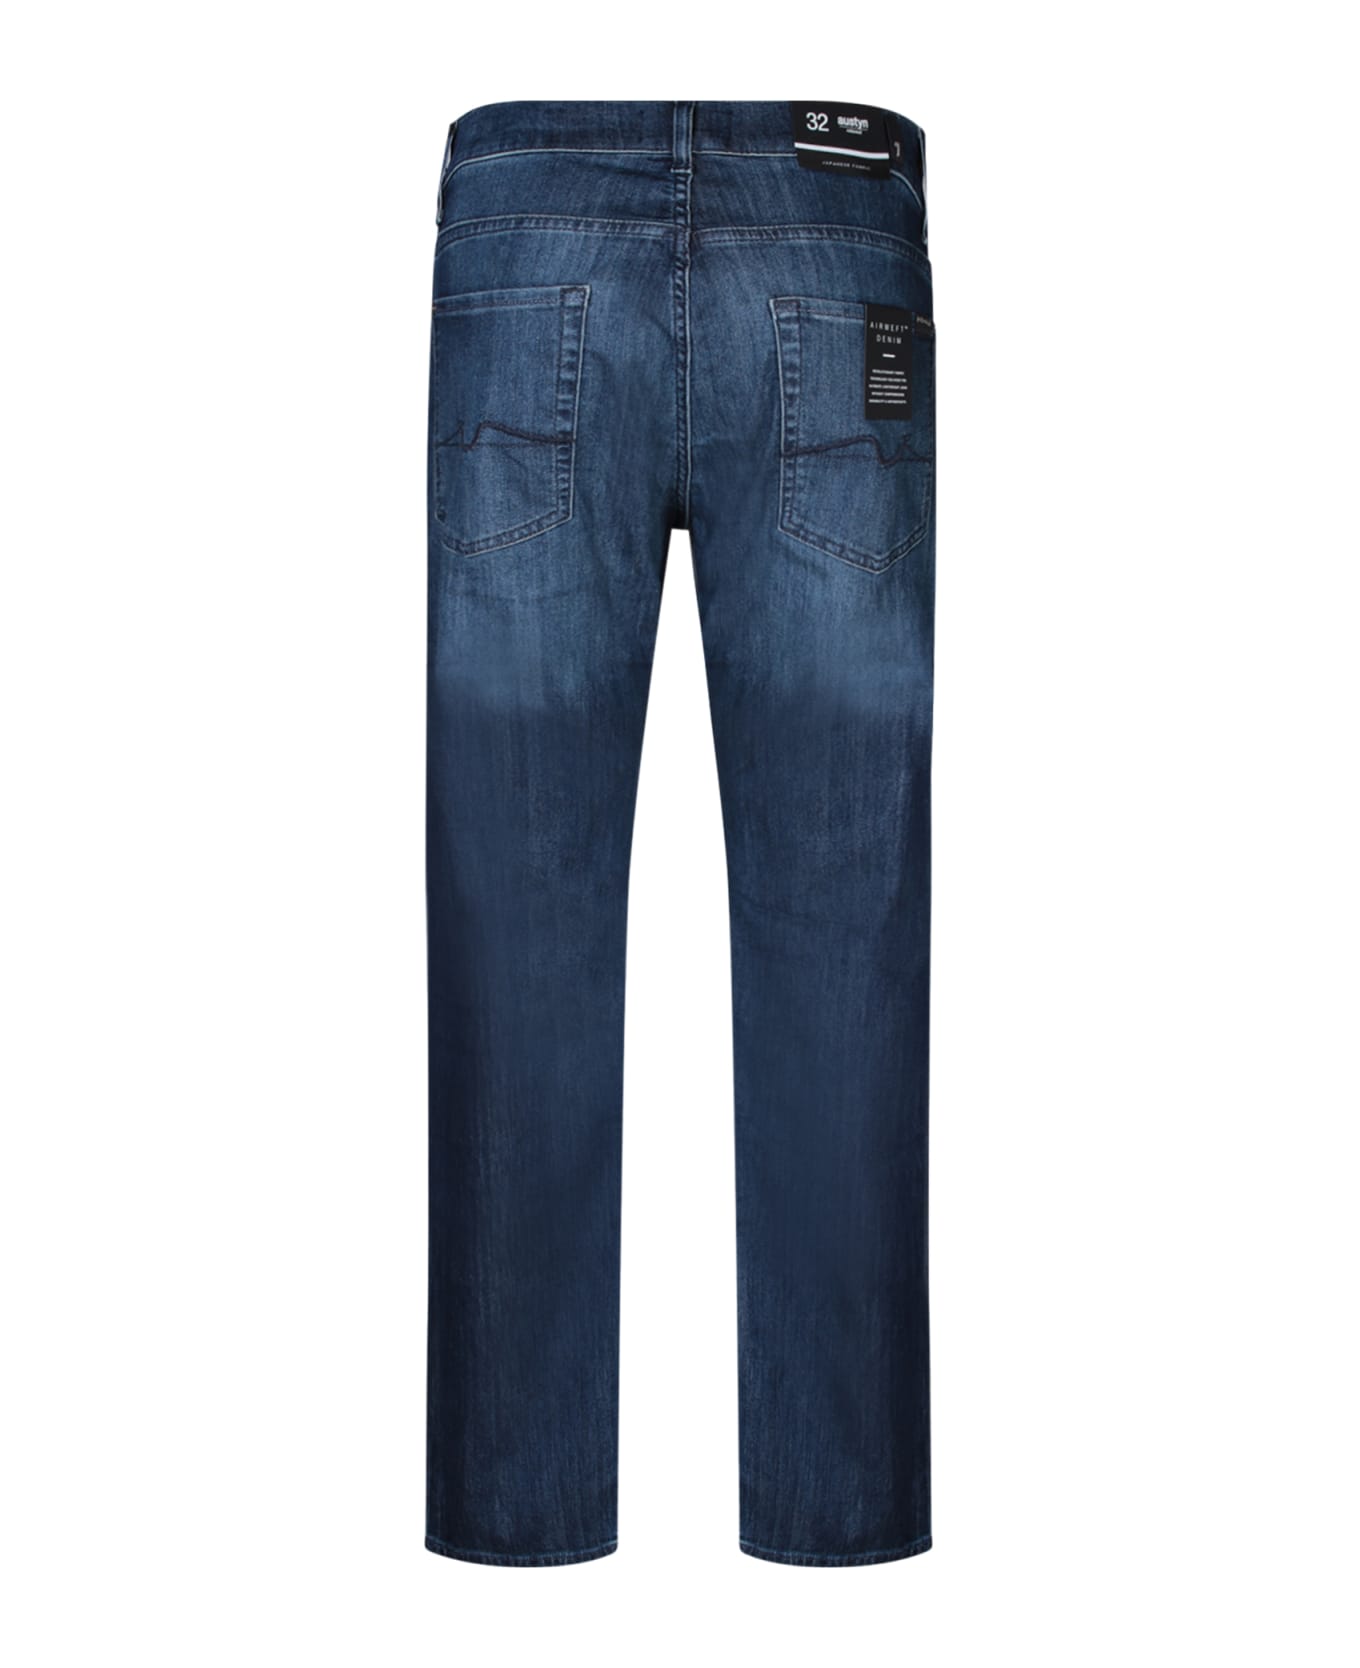 7 For All Mankind Austyn Headway Blue Jeans - Blue デニム